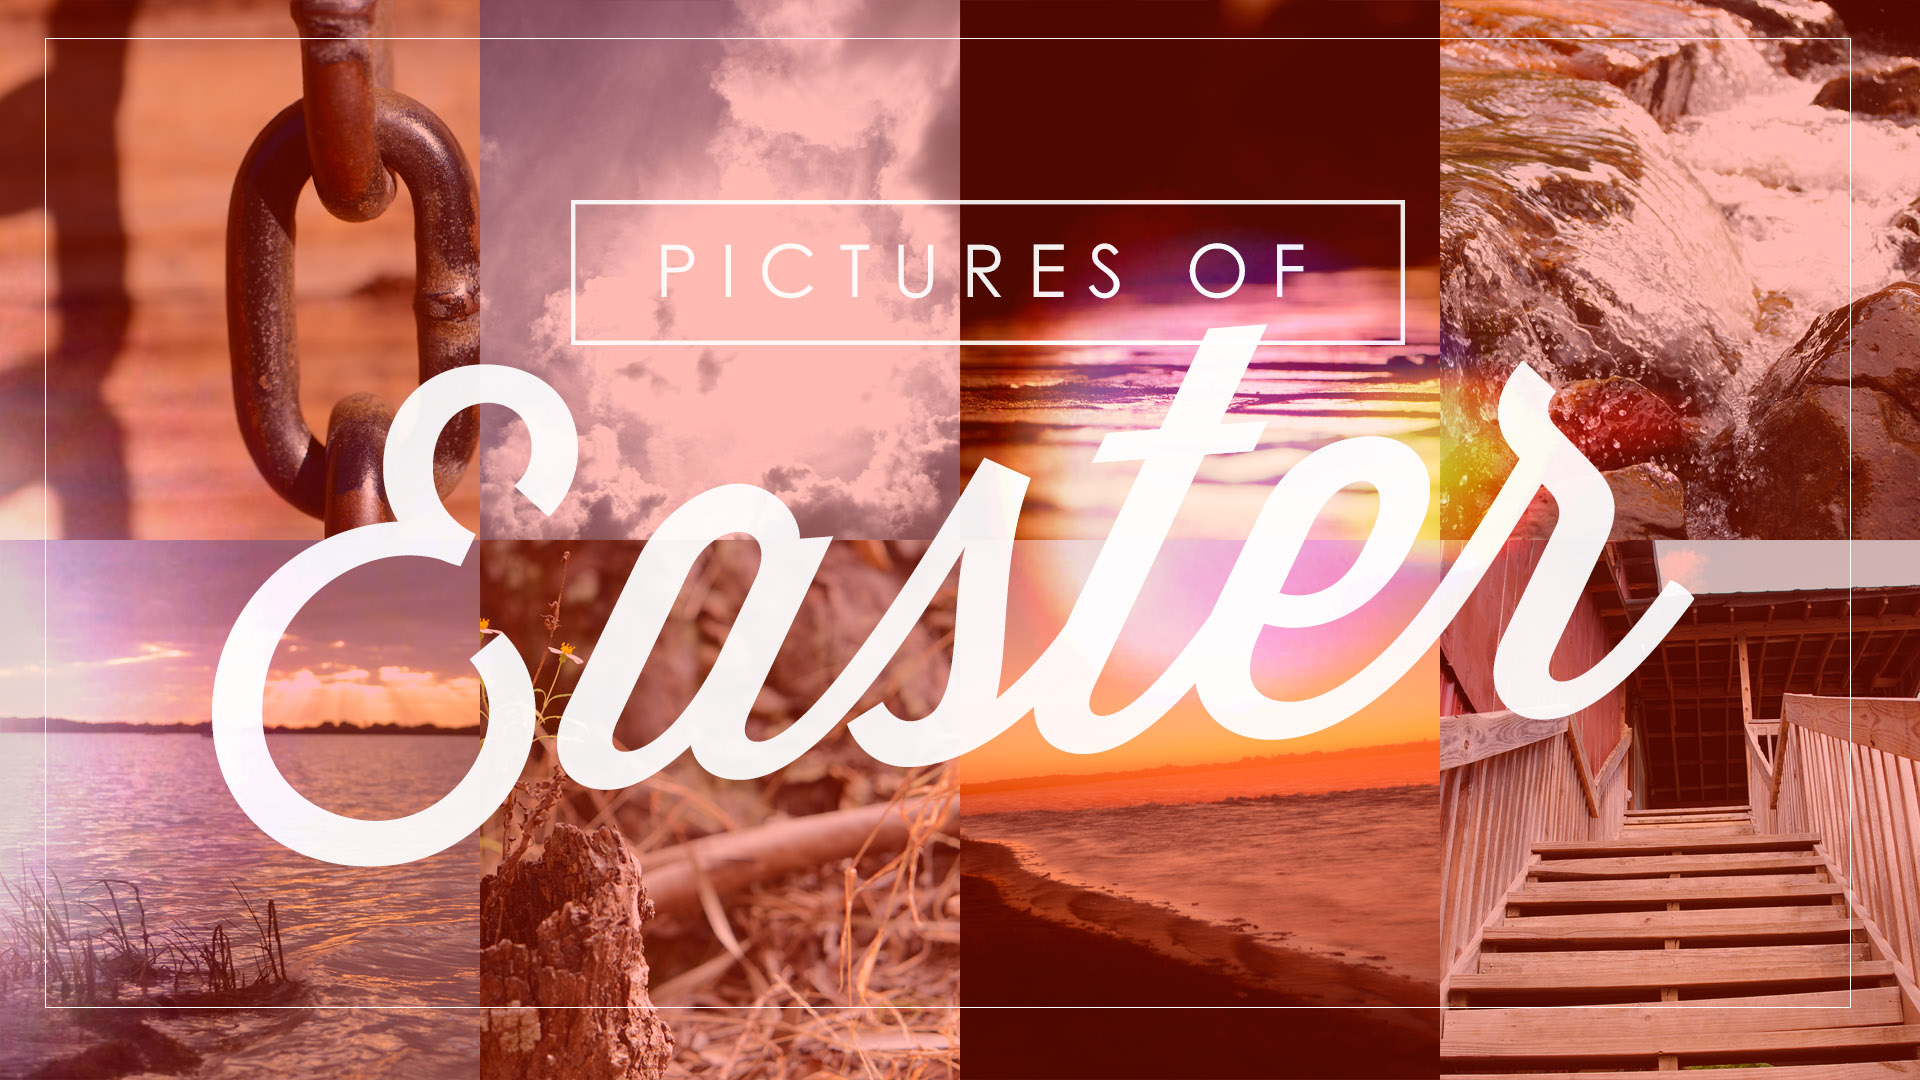 Pictures_of_Easter_title.jpg